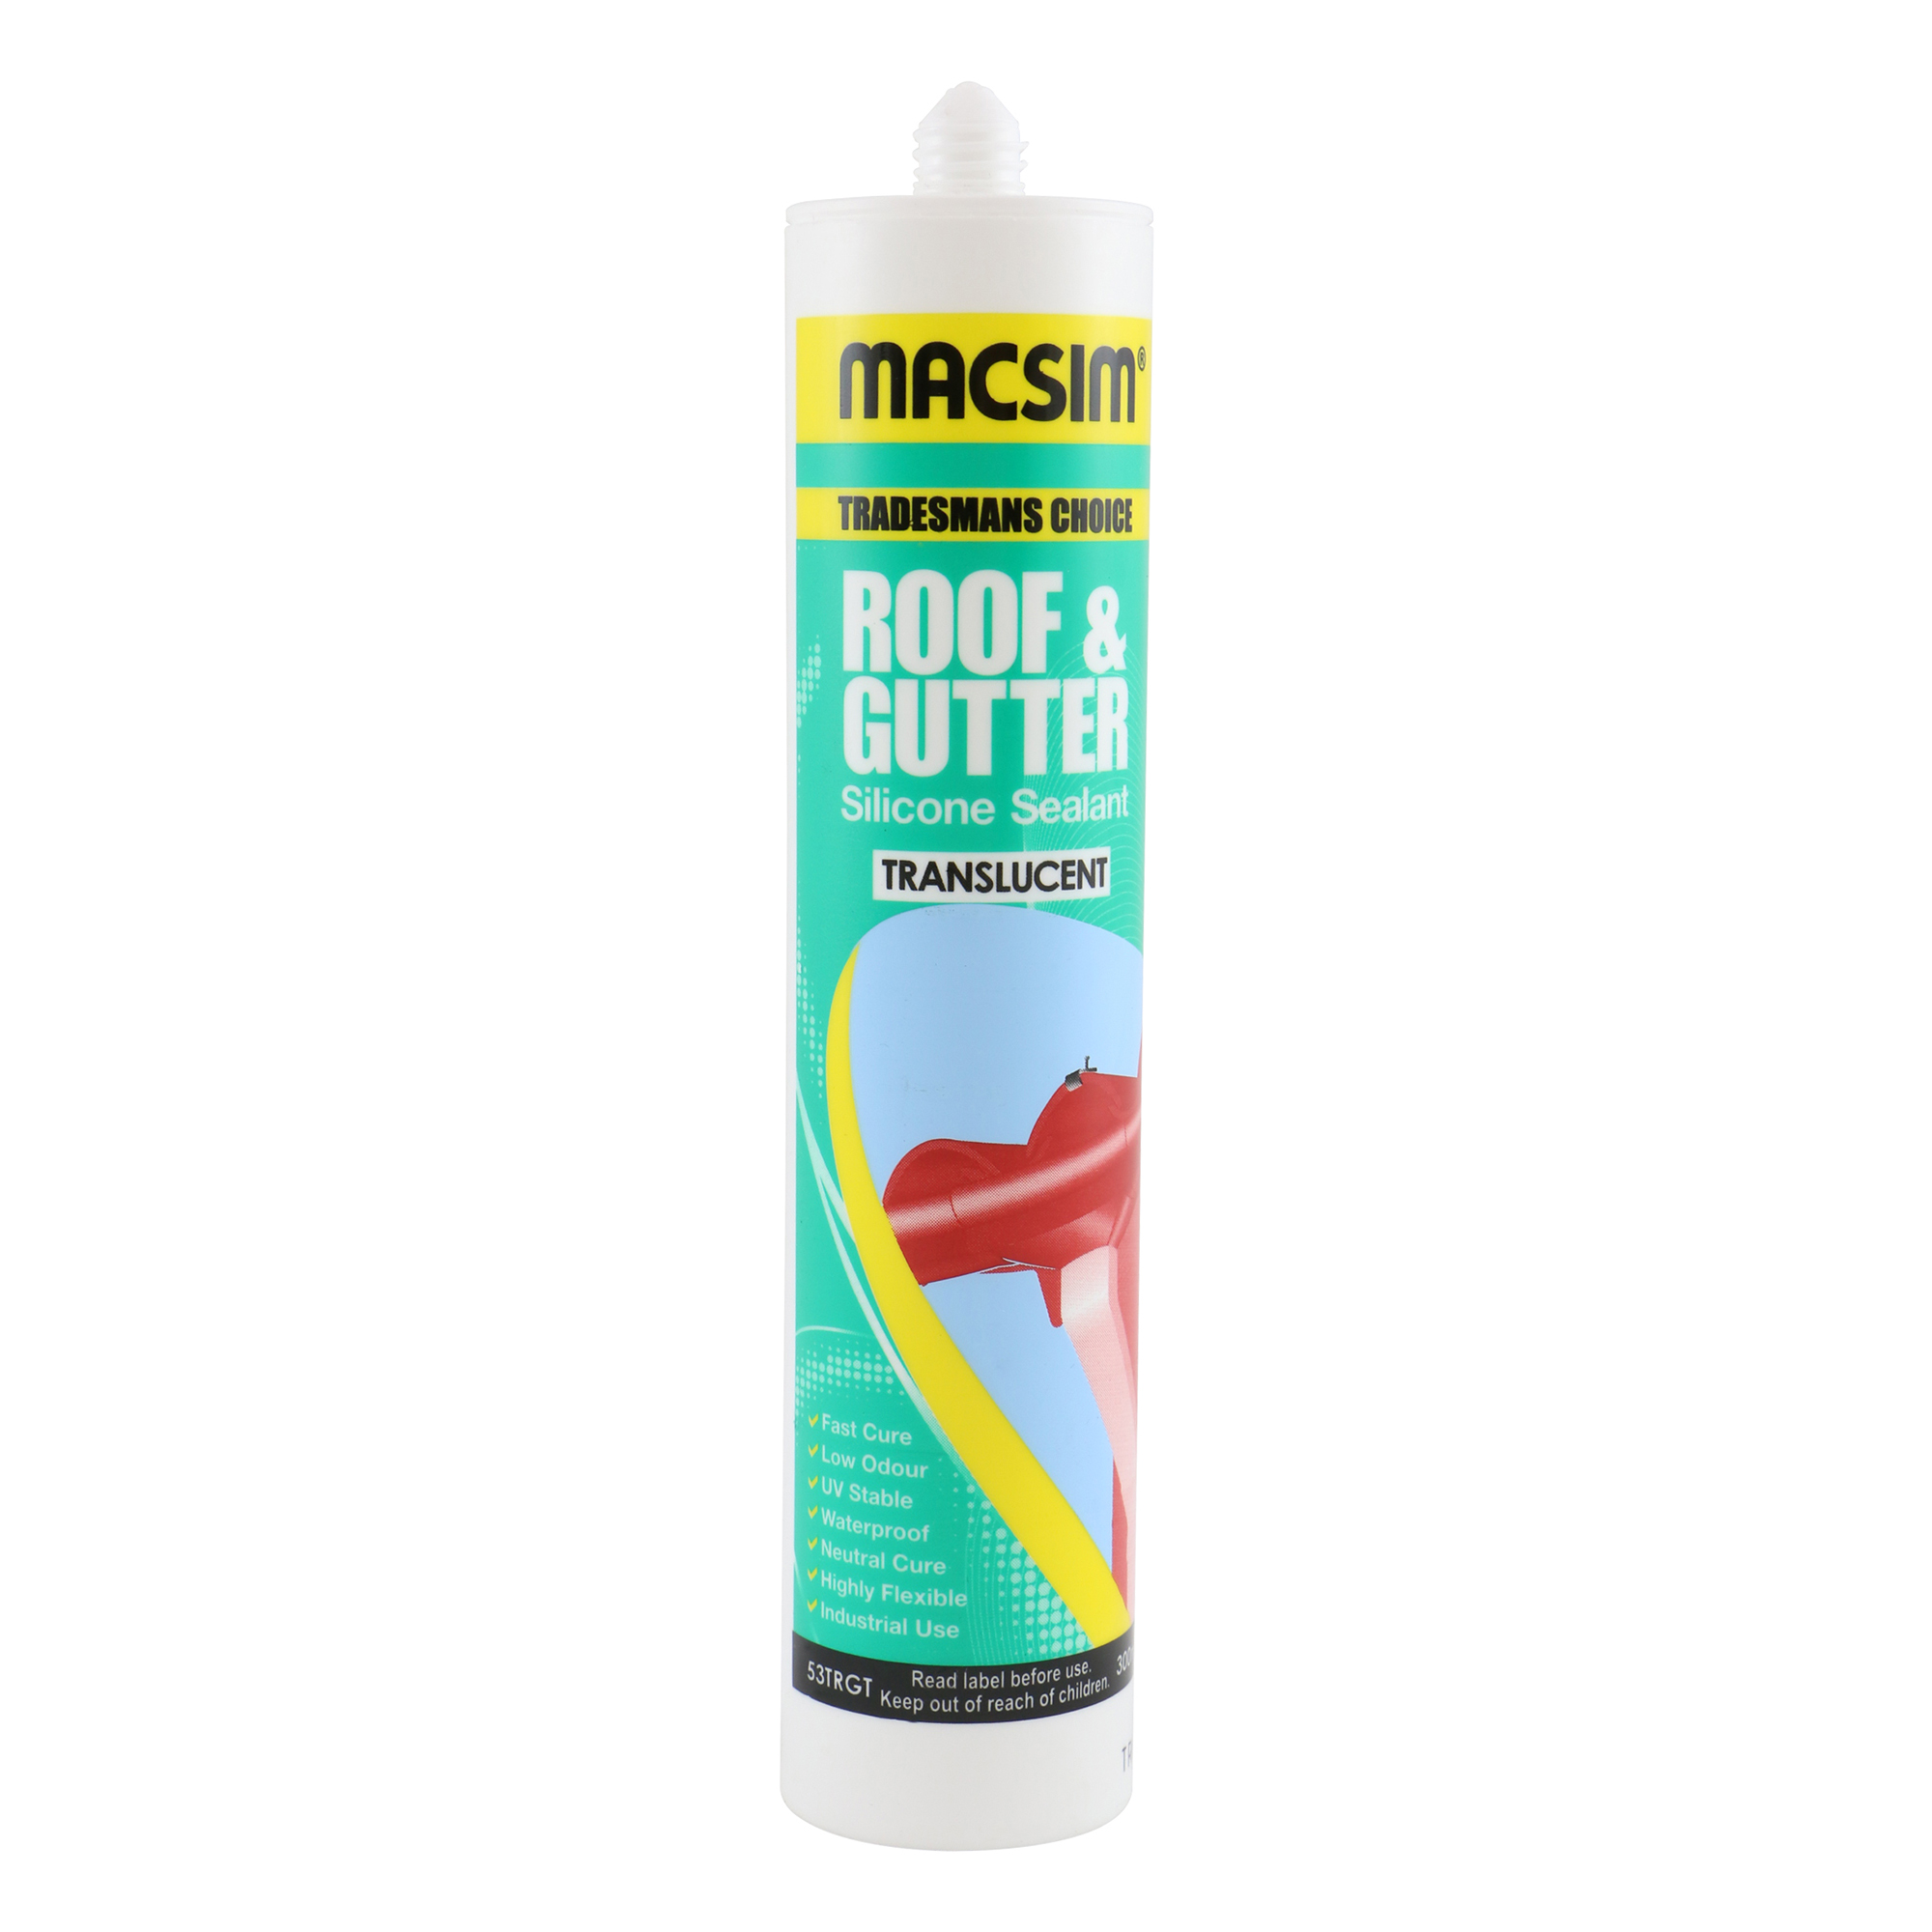 Macsim Roof & Gutter Trans Silicone